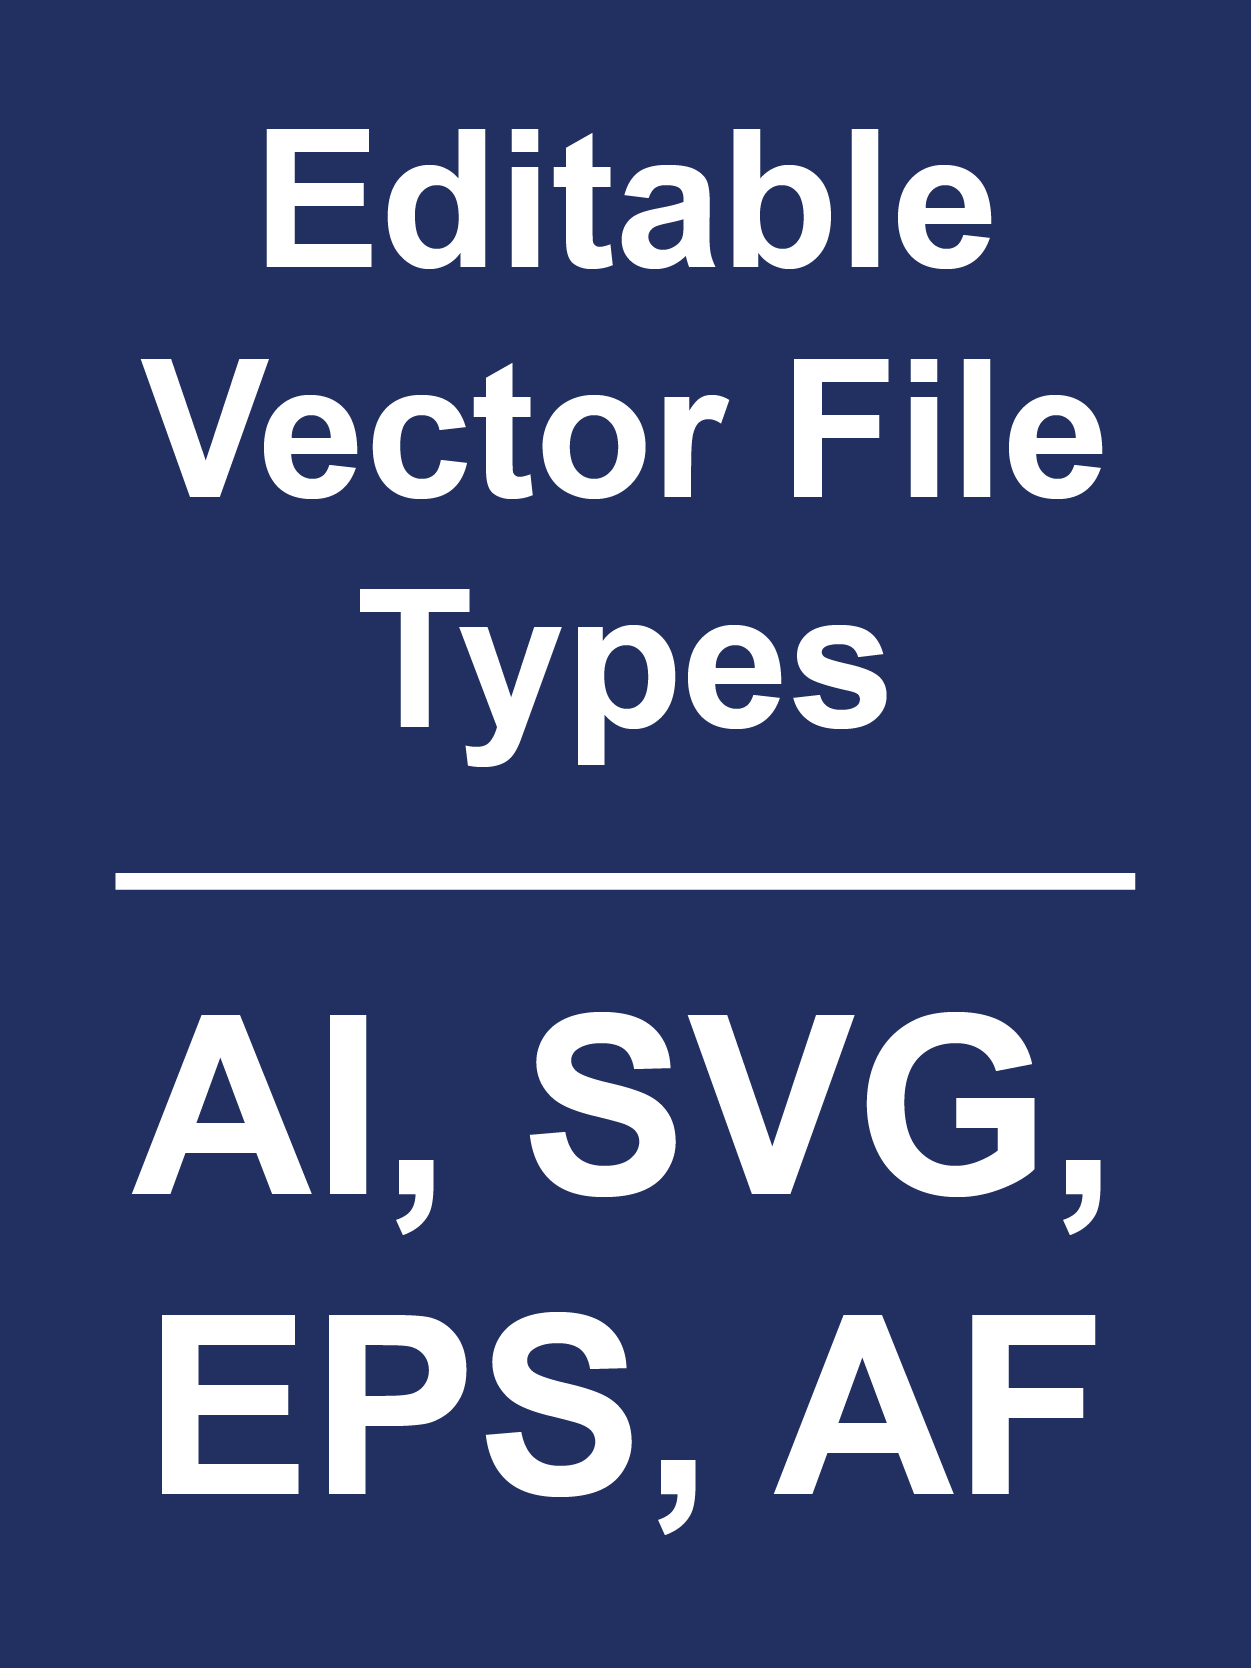 Vector file type recommendations